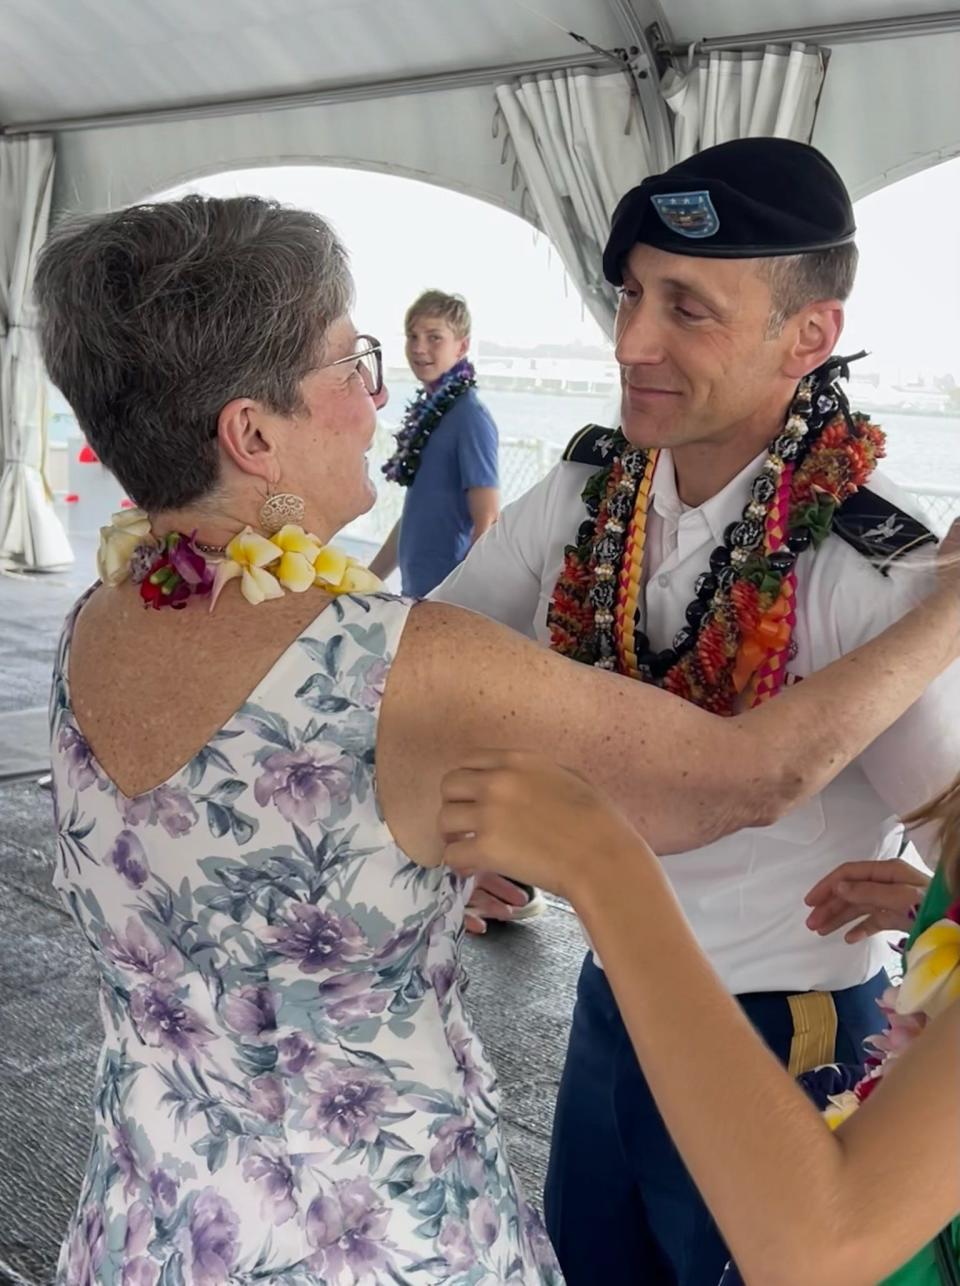 Karen Burkavage, of Honesdale, is shown after placing the beret on her son Philip D. Cordaro, newly promoted to colonel in the U.S. Army aboard the USS Missouri at Pearl Harbor on April 5, 2024. Col. Cordaro entered the Army immediately after graduating from Honesdale High School in 1996.